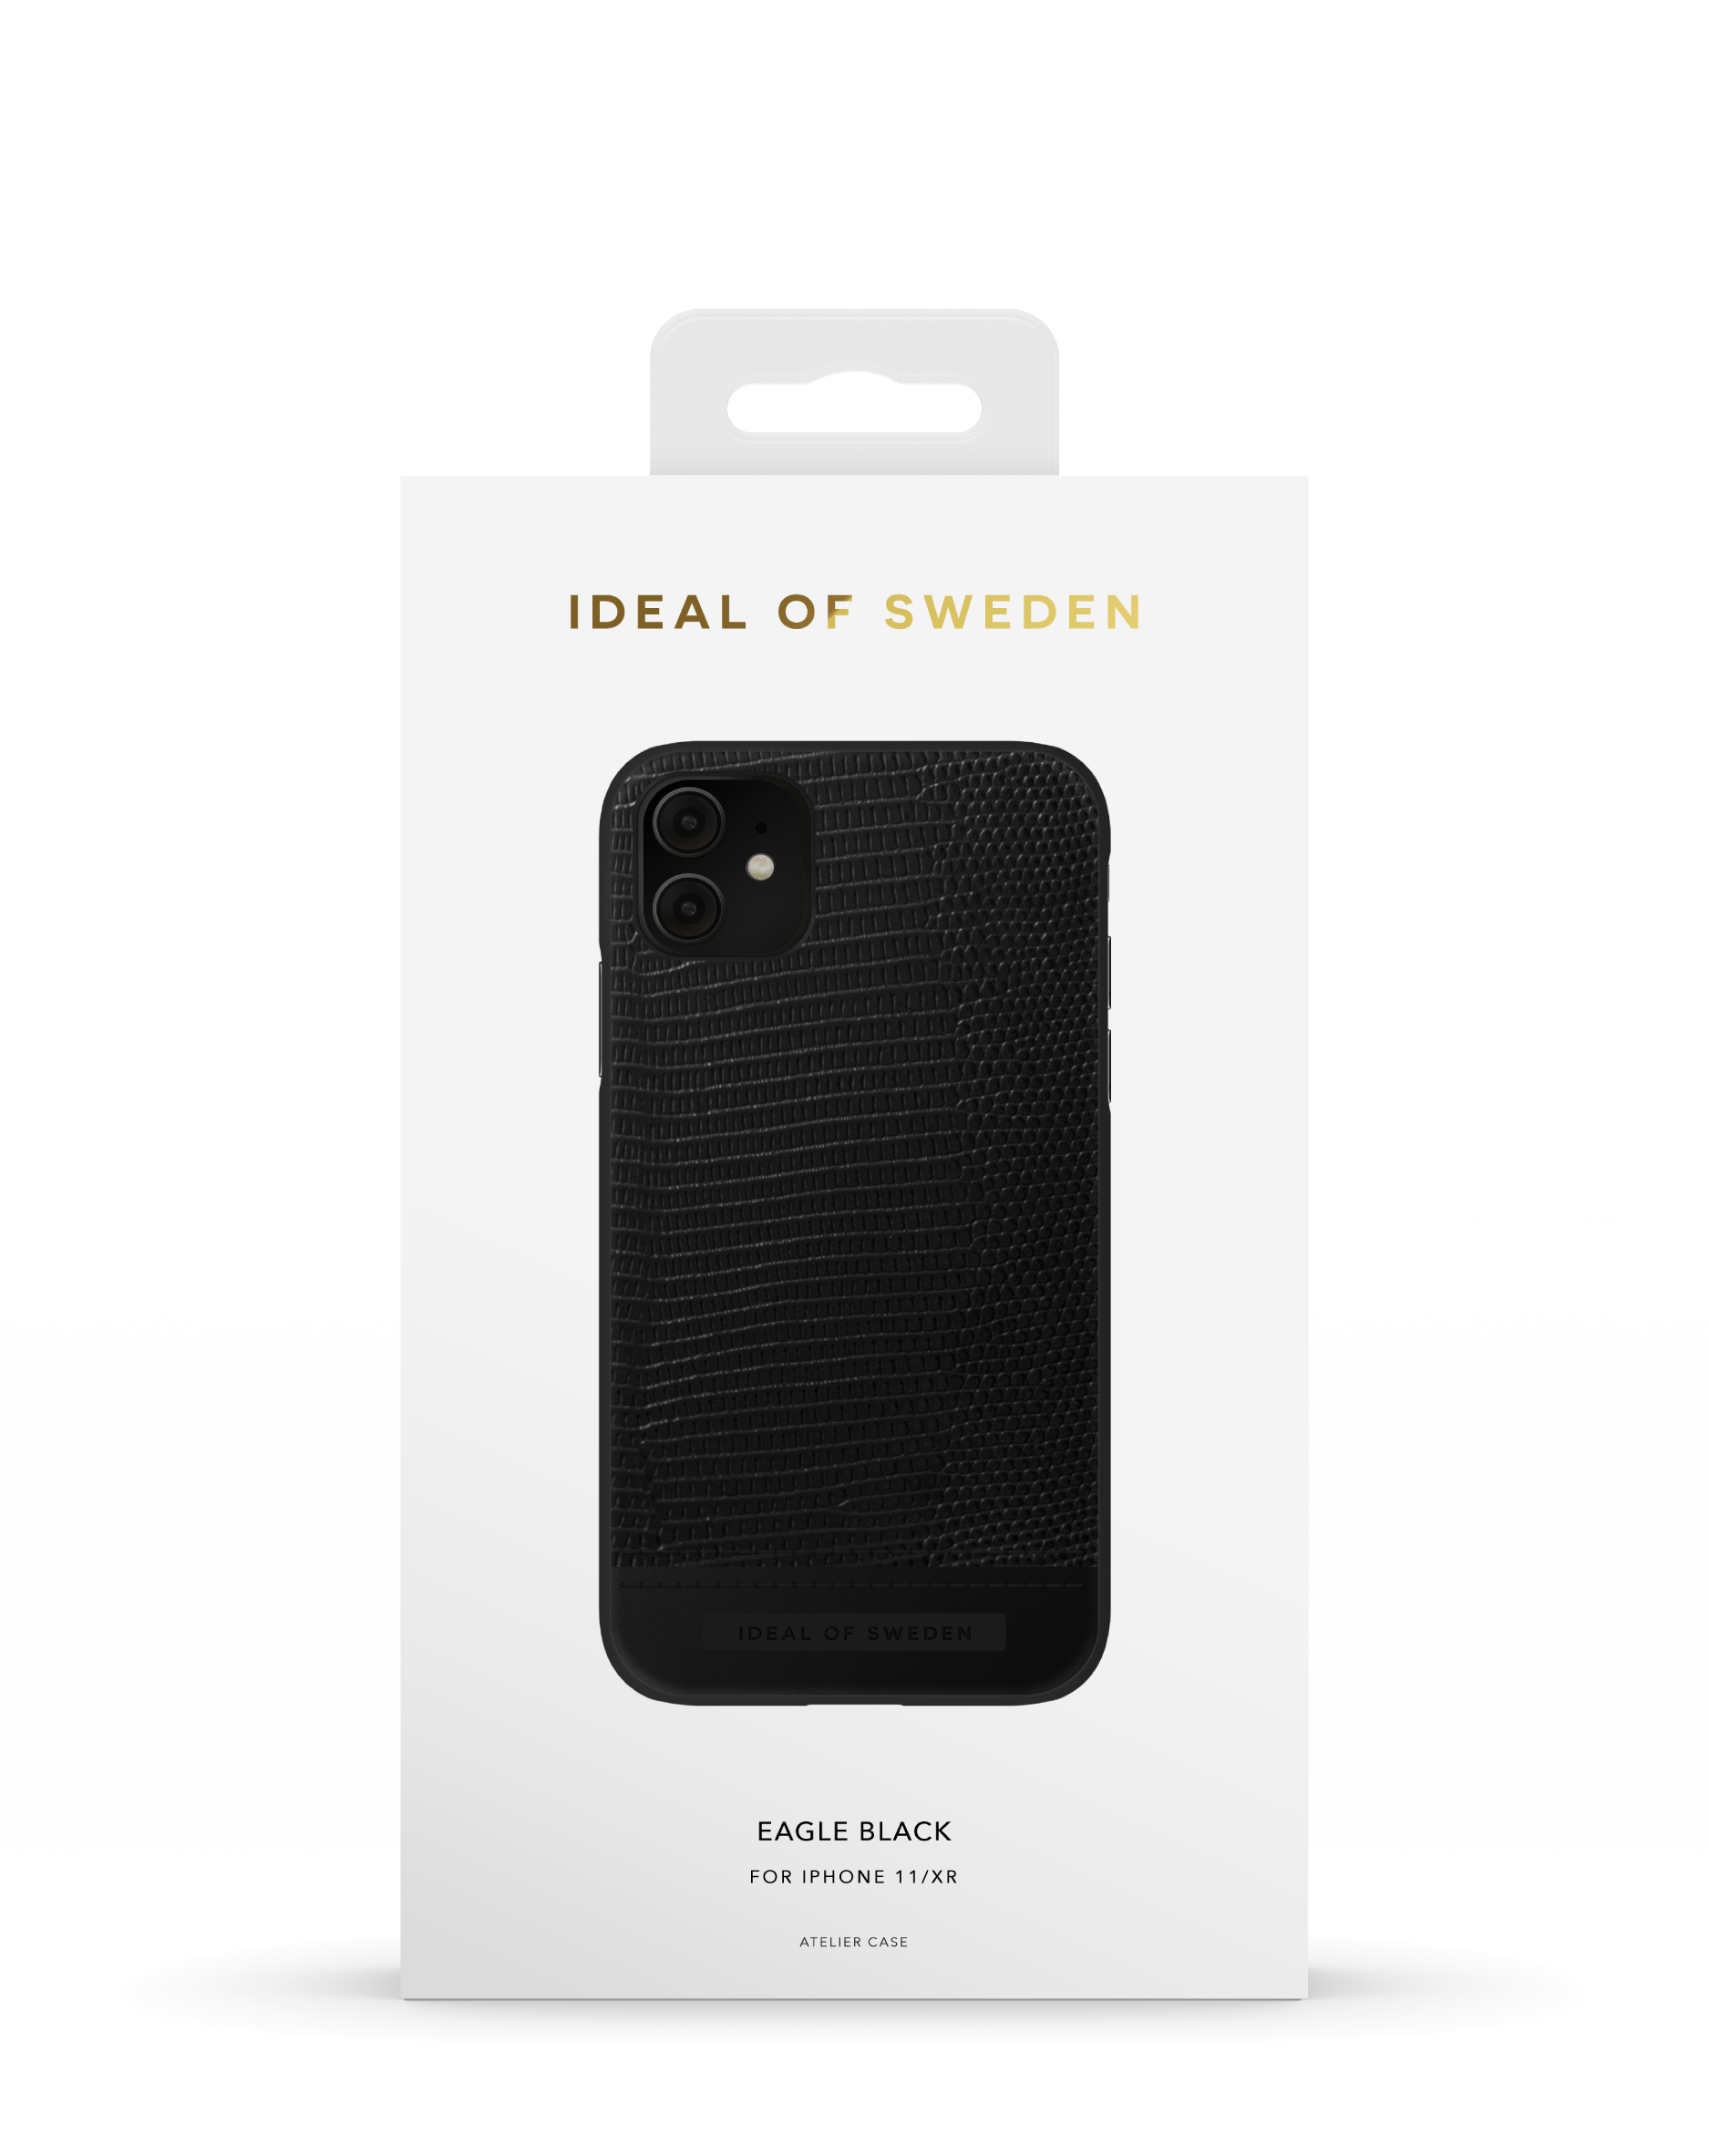 OF Black 11, Apple, iPhone IDEAL Eagle Backcover, XR, iPhone SWEDEN IDACAW20-1961-229,